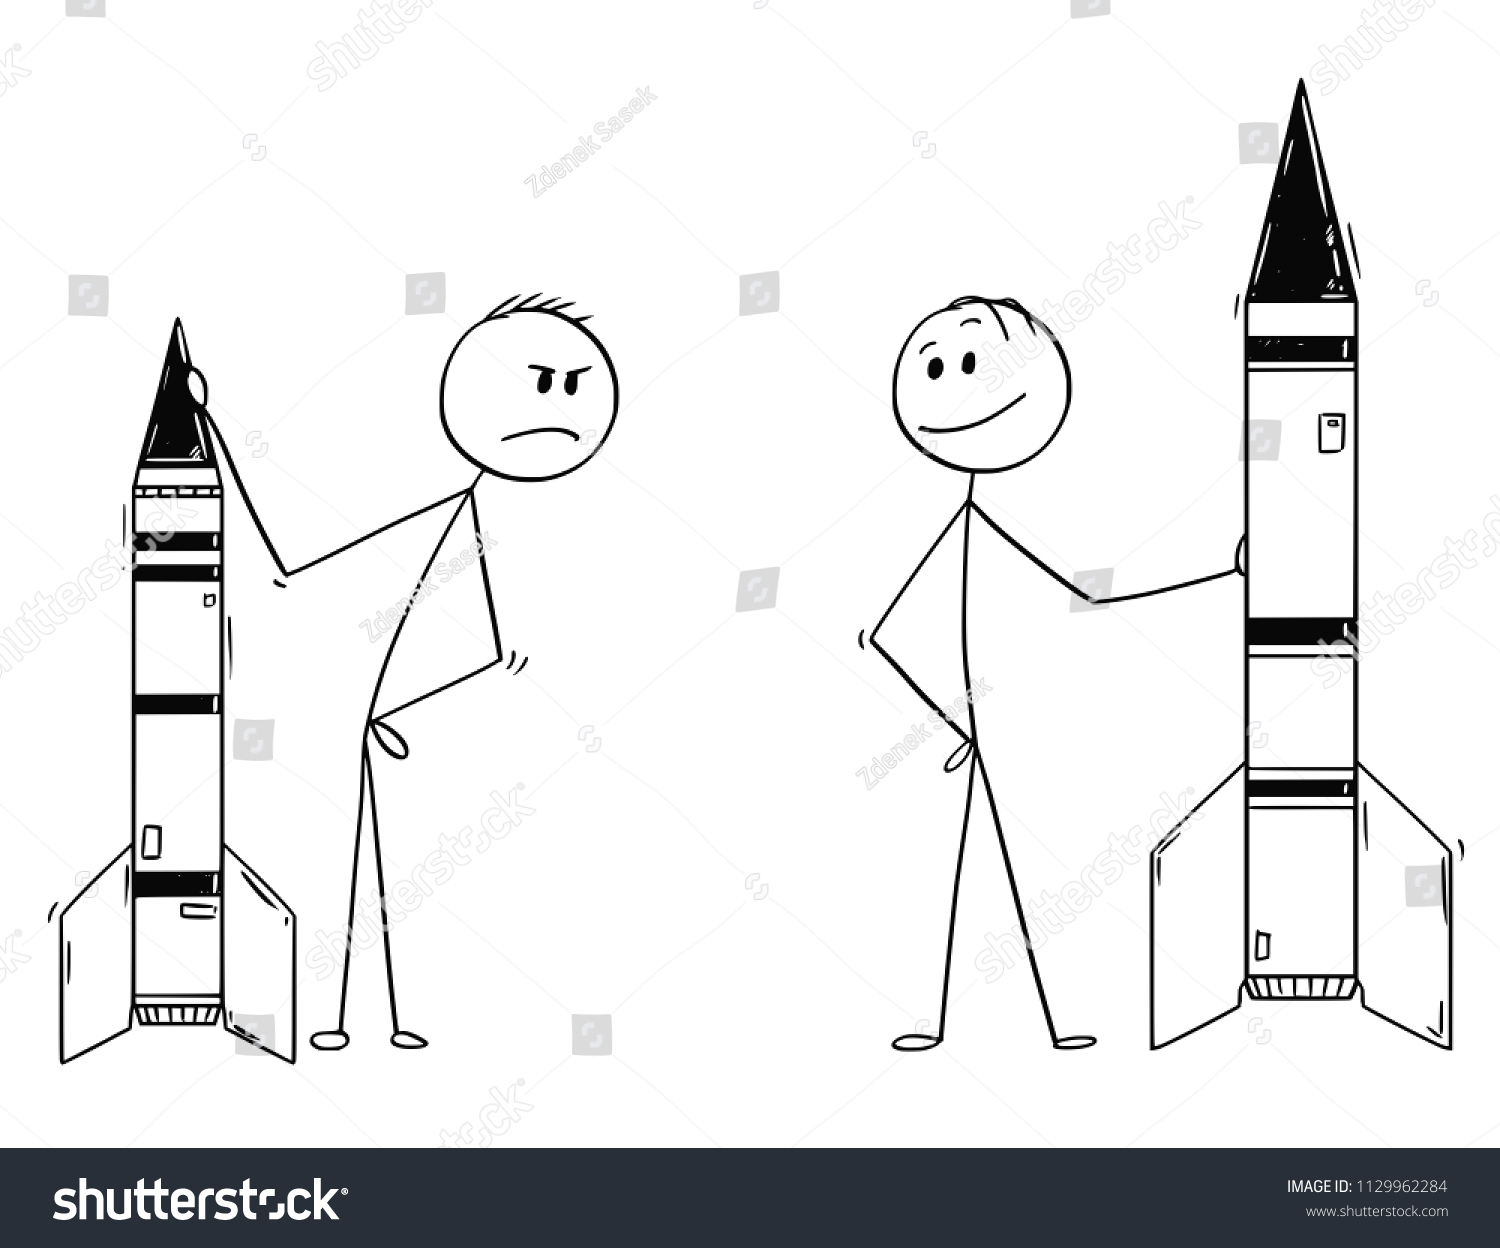 Cartoon stick drawing conceptual illustration of two politicians or businessmen demonstrating missiles or rockets. Concept of military force deterrence .